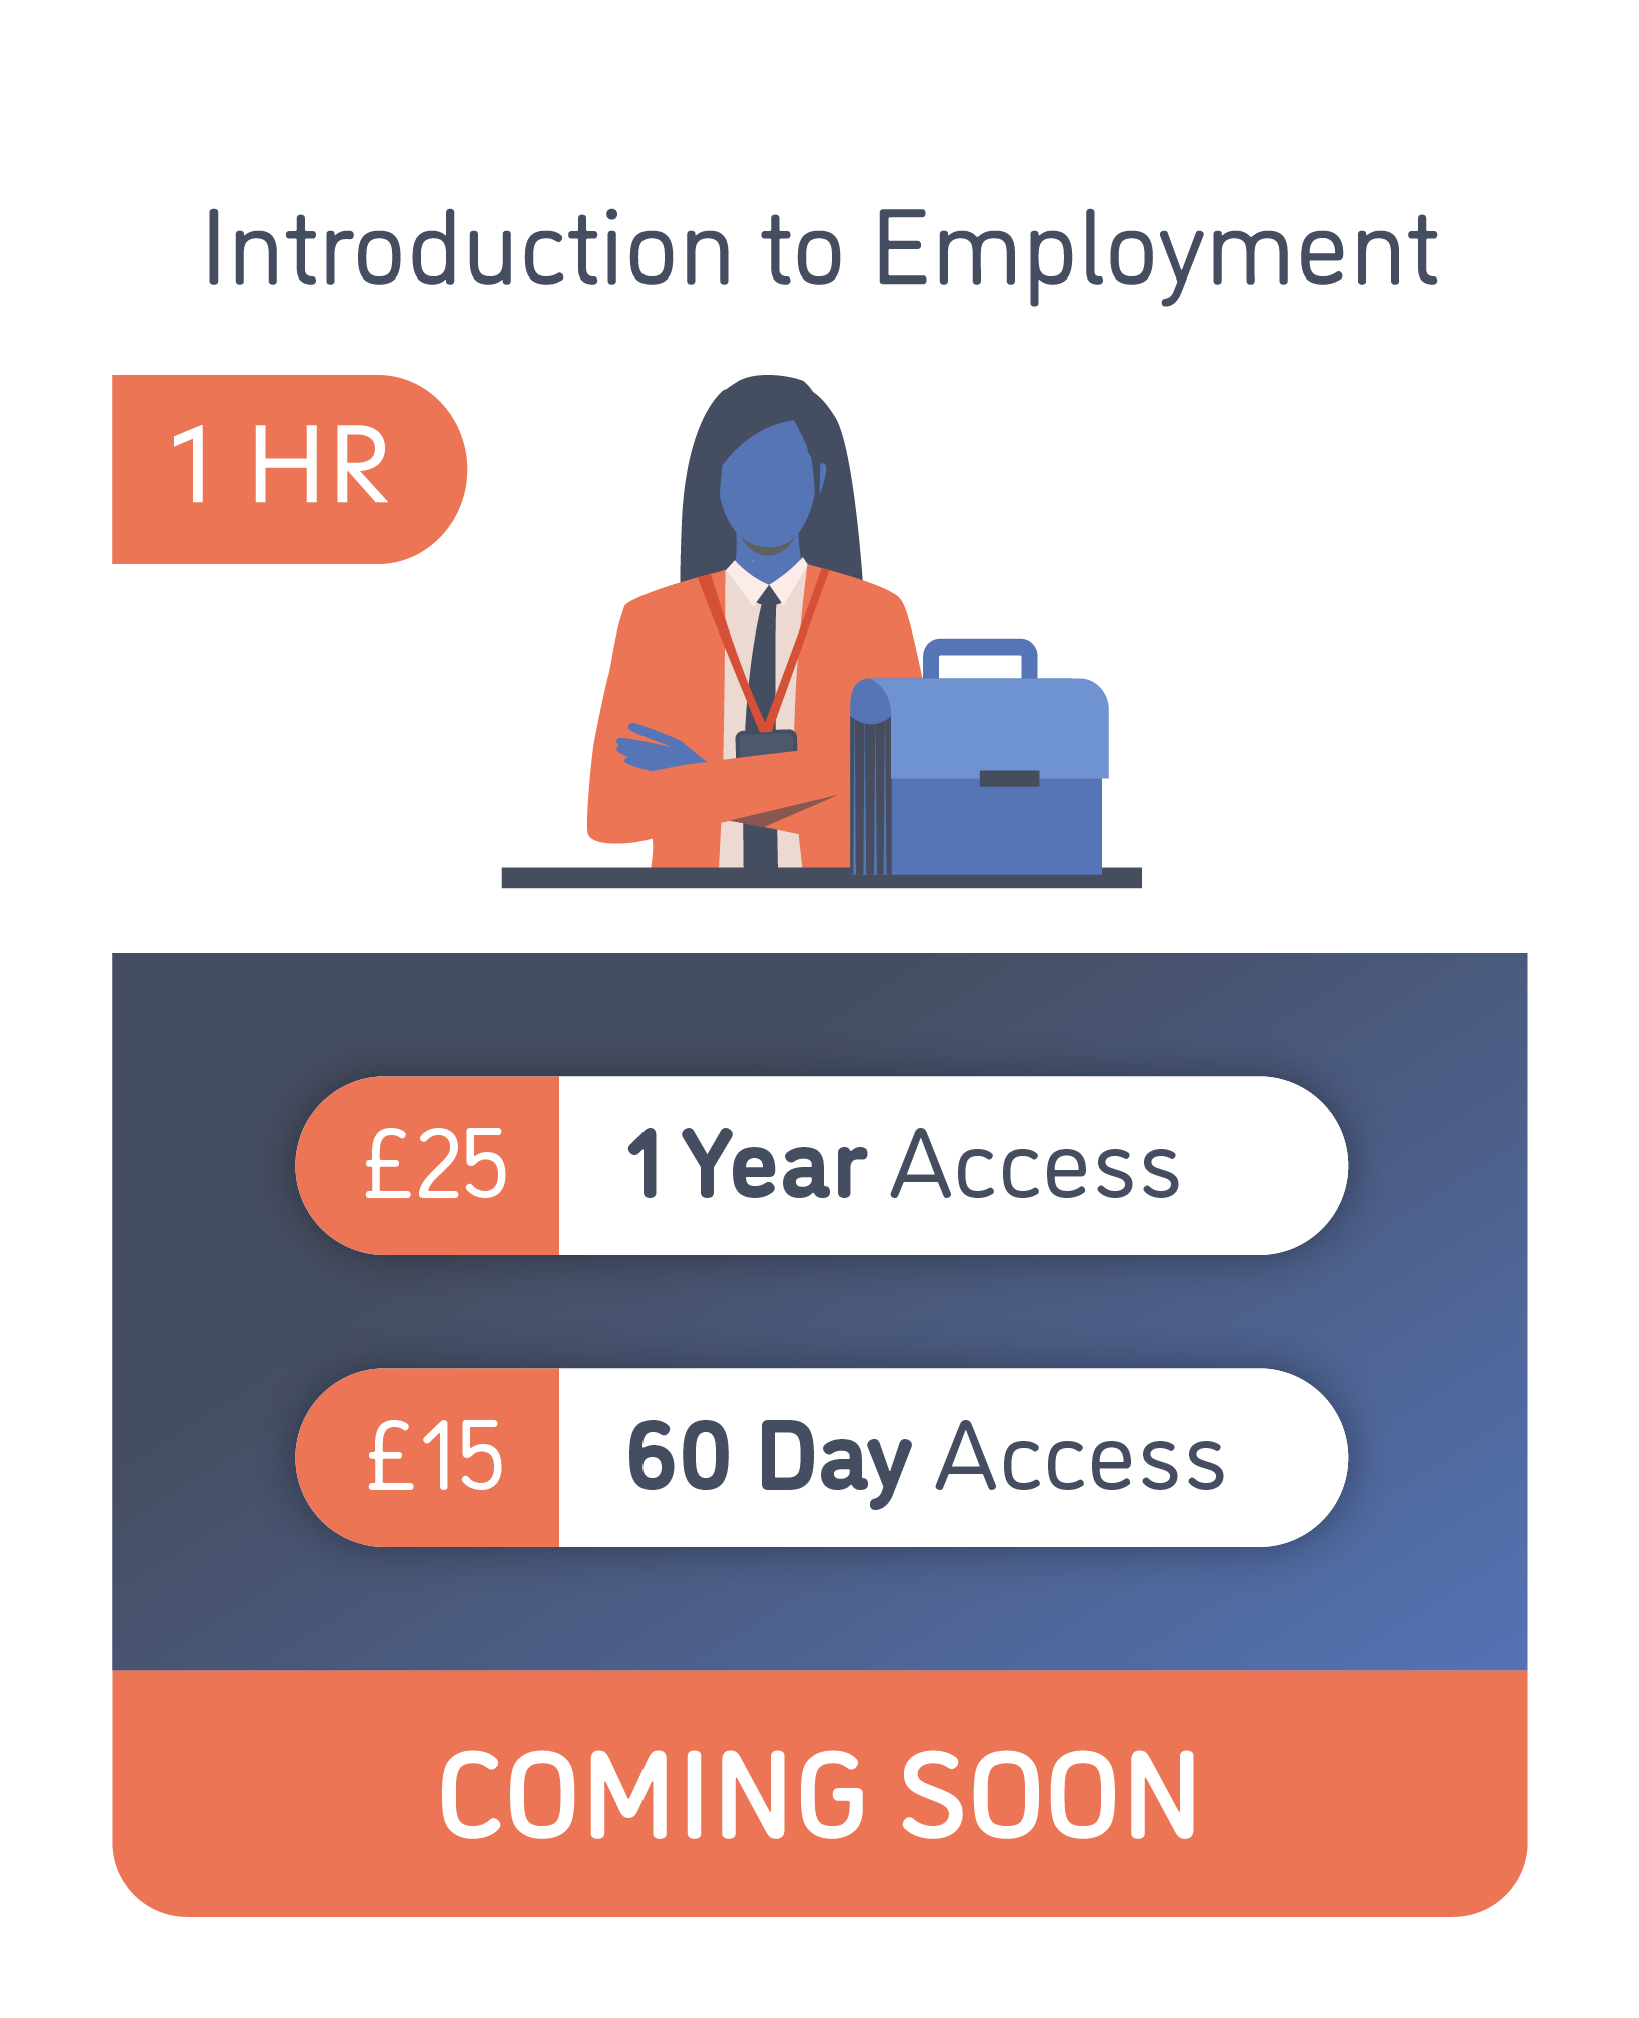 An image of Introduction to Employment, which shows the pricing options and when clicked link to the course description 